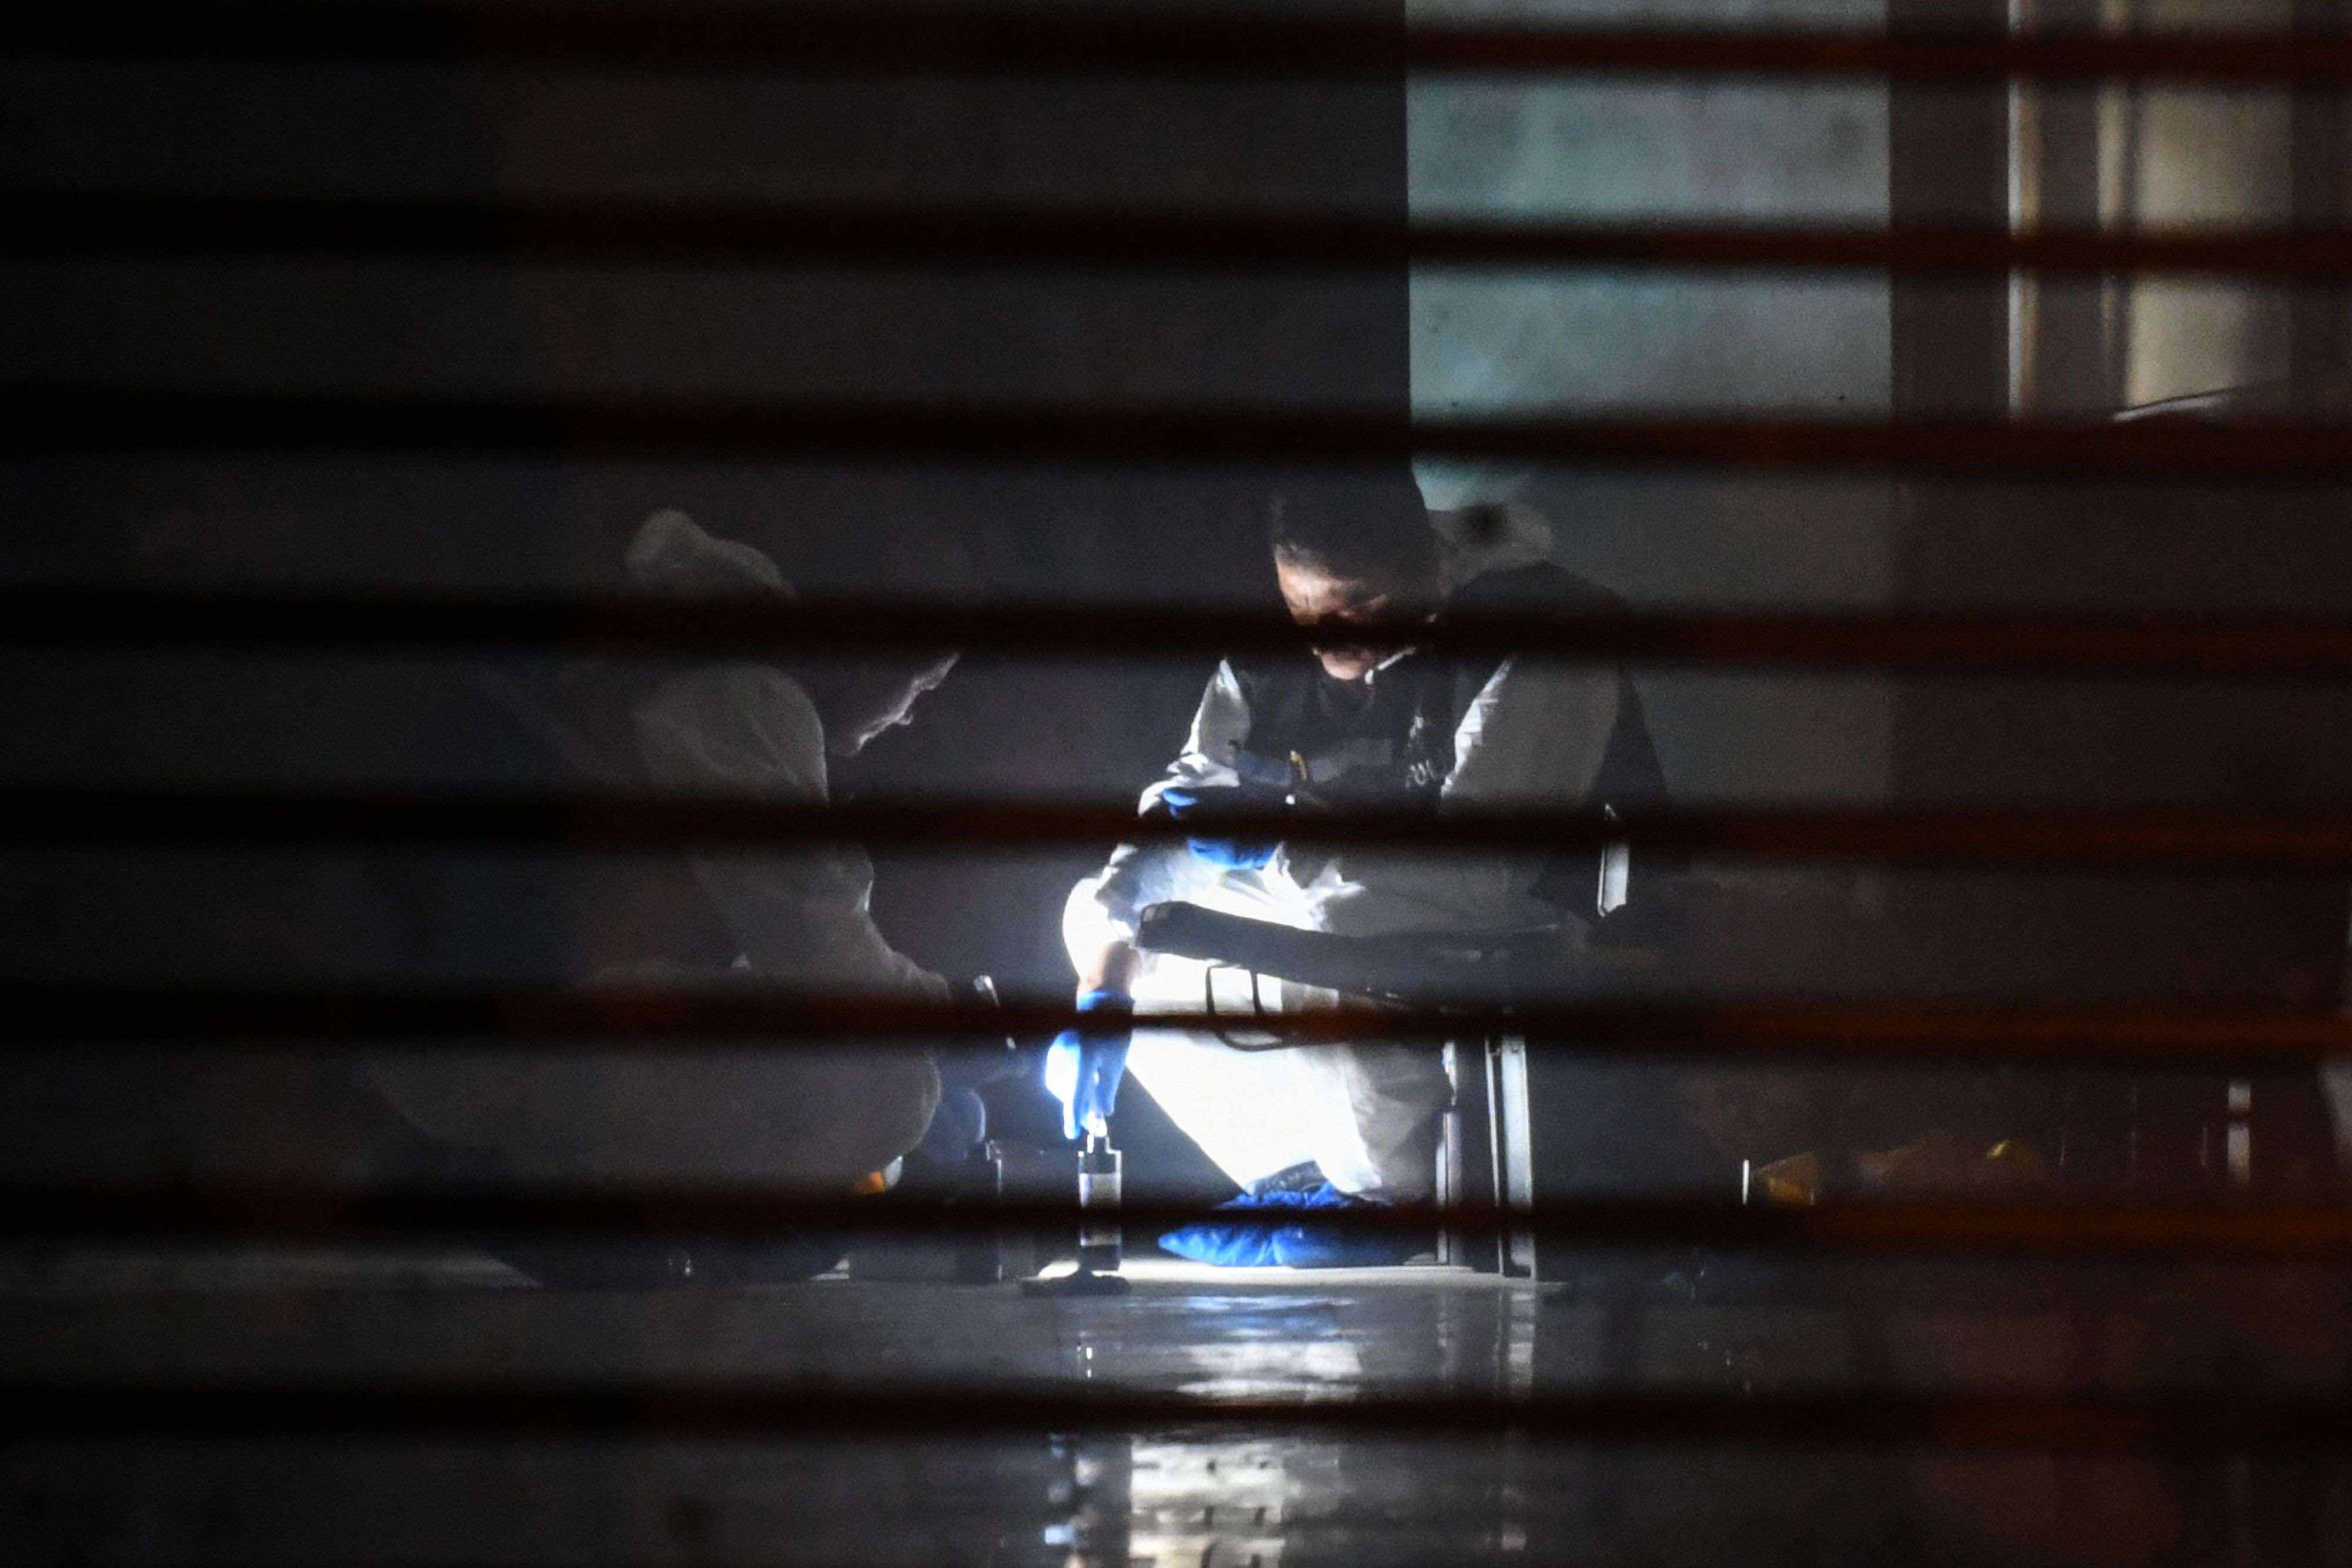 Turkish forensic search for evidence at the garage of Saudi Arabia's Consul General Mohammad al-Otaibi on October 17, 2018 in Istanbul